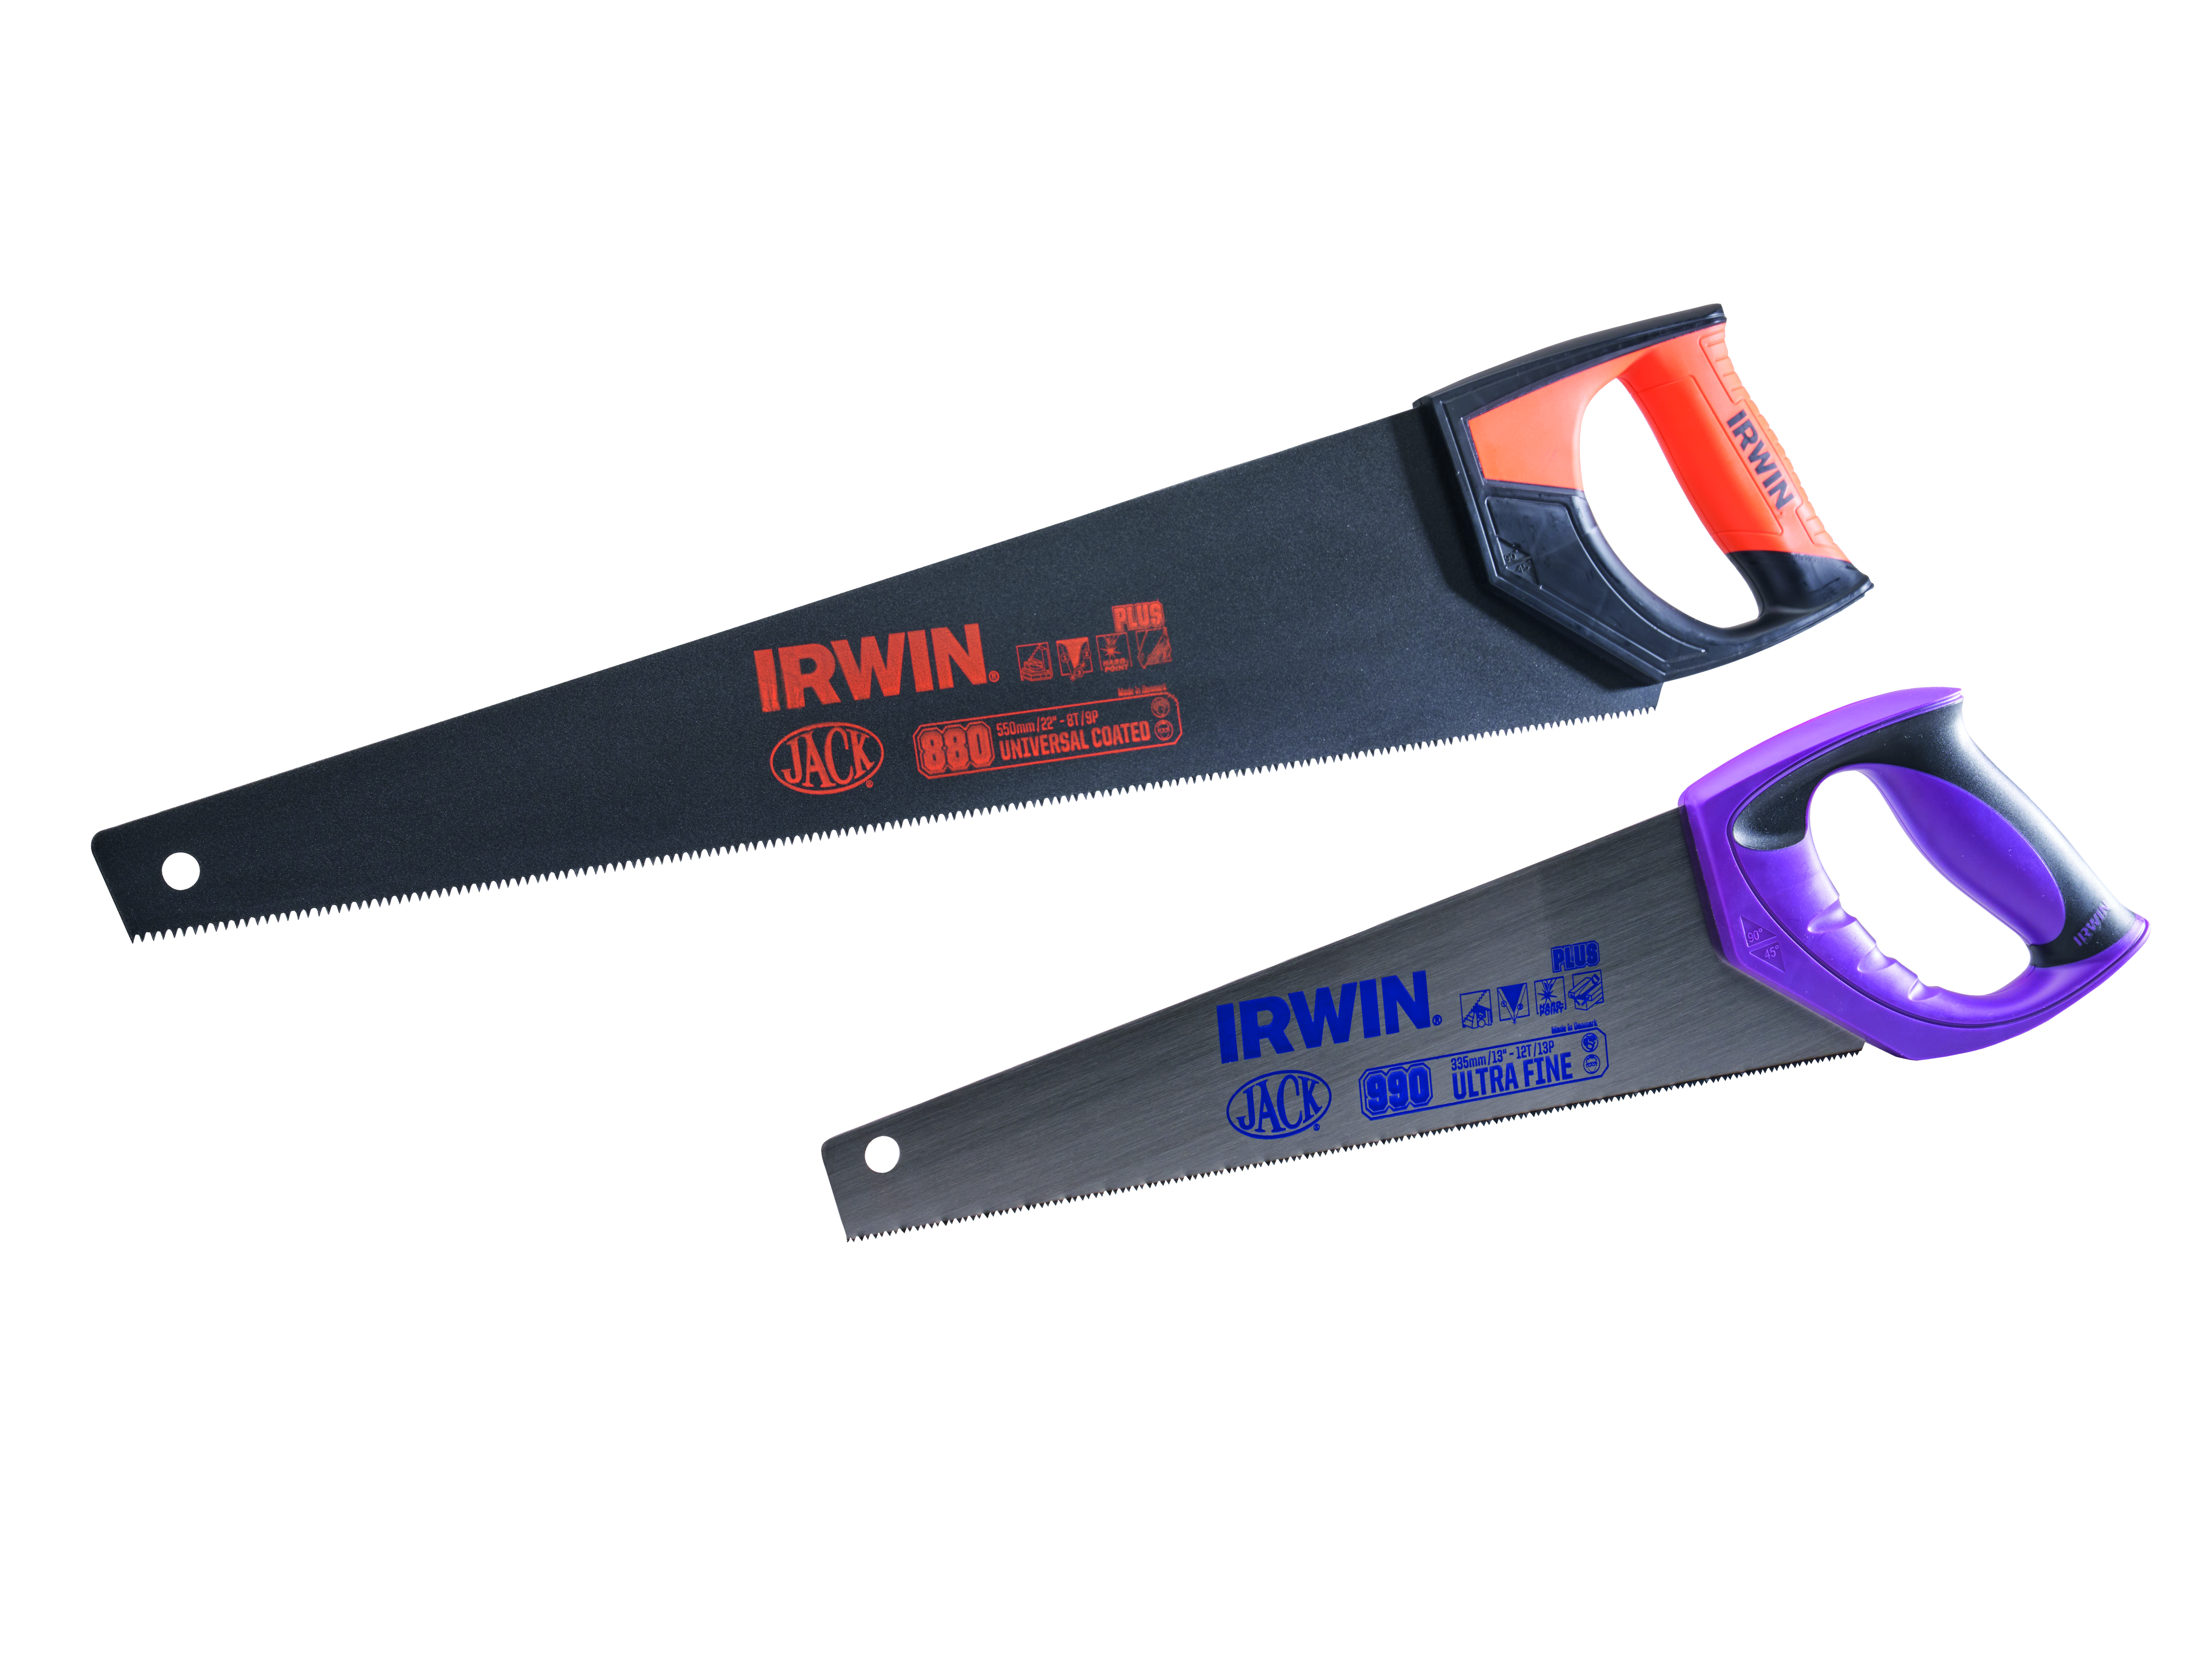 Irwin Jack 880 Coated Saw with Toolbox Saw